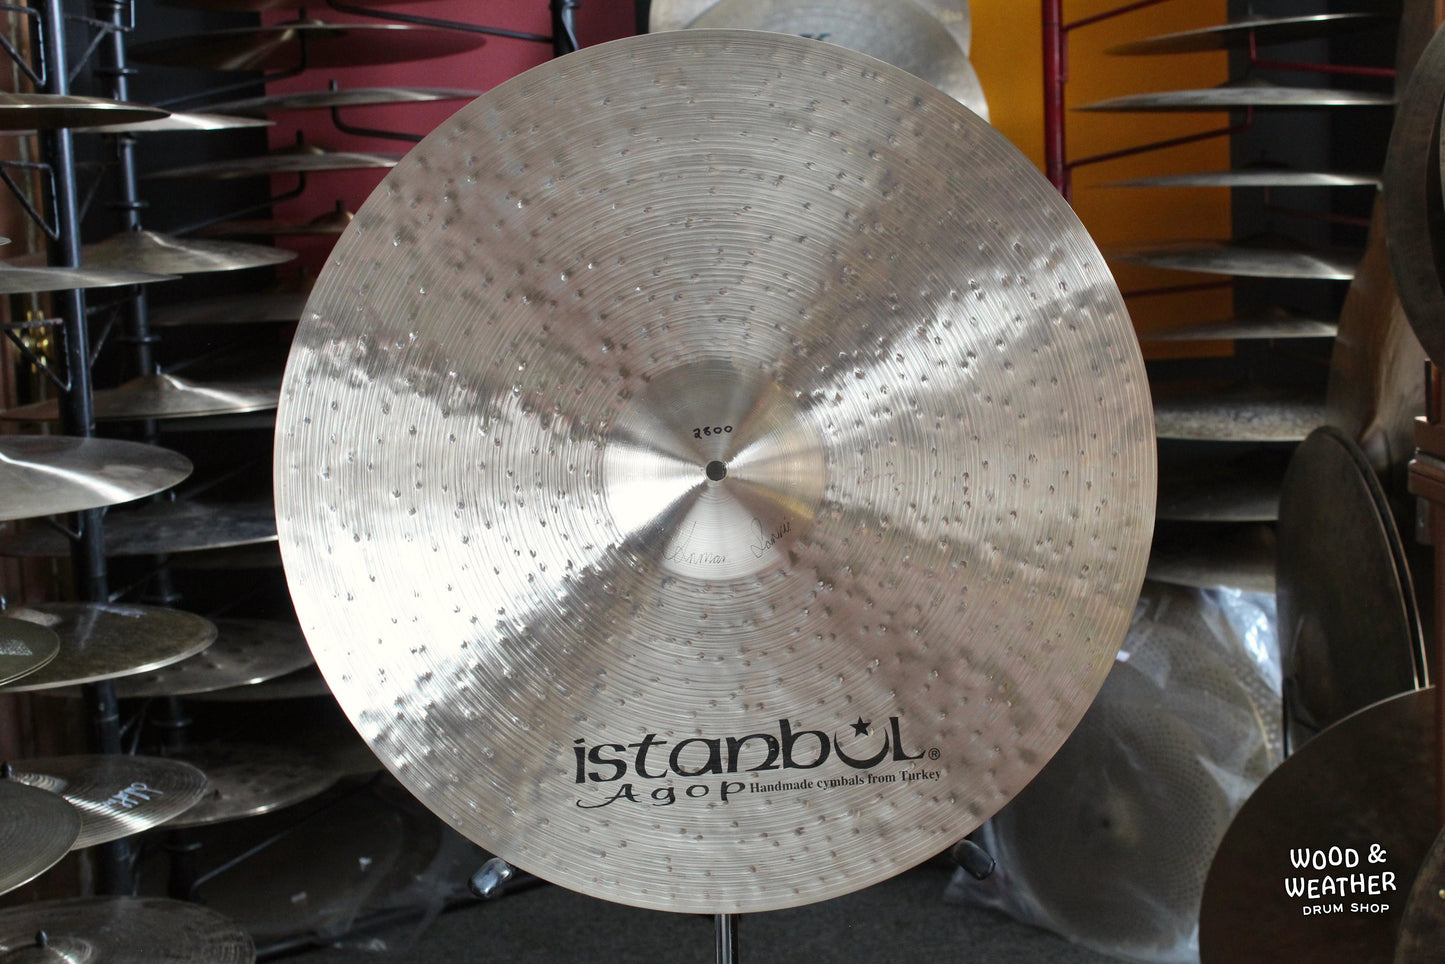 Istanbul Agop 22" Mantra Ride Cymbal 2800g